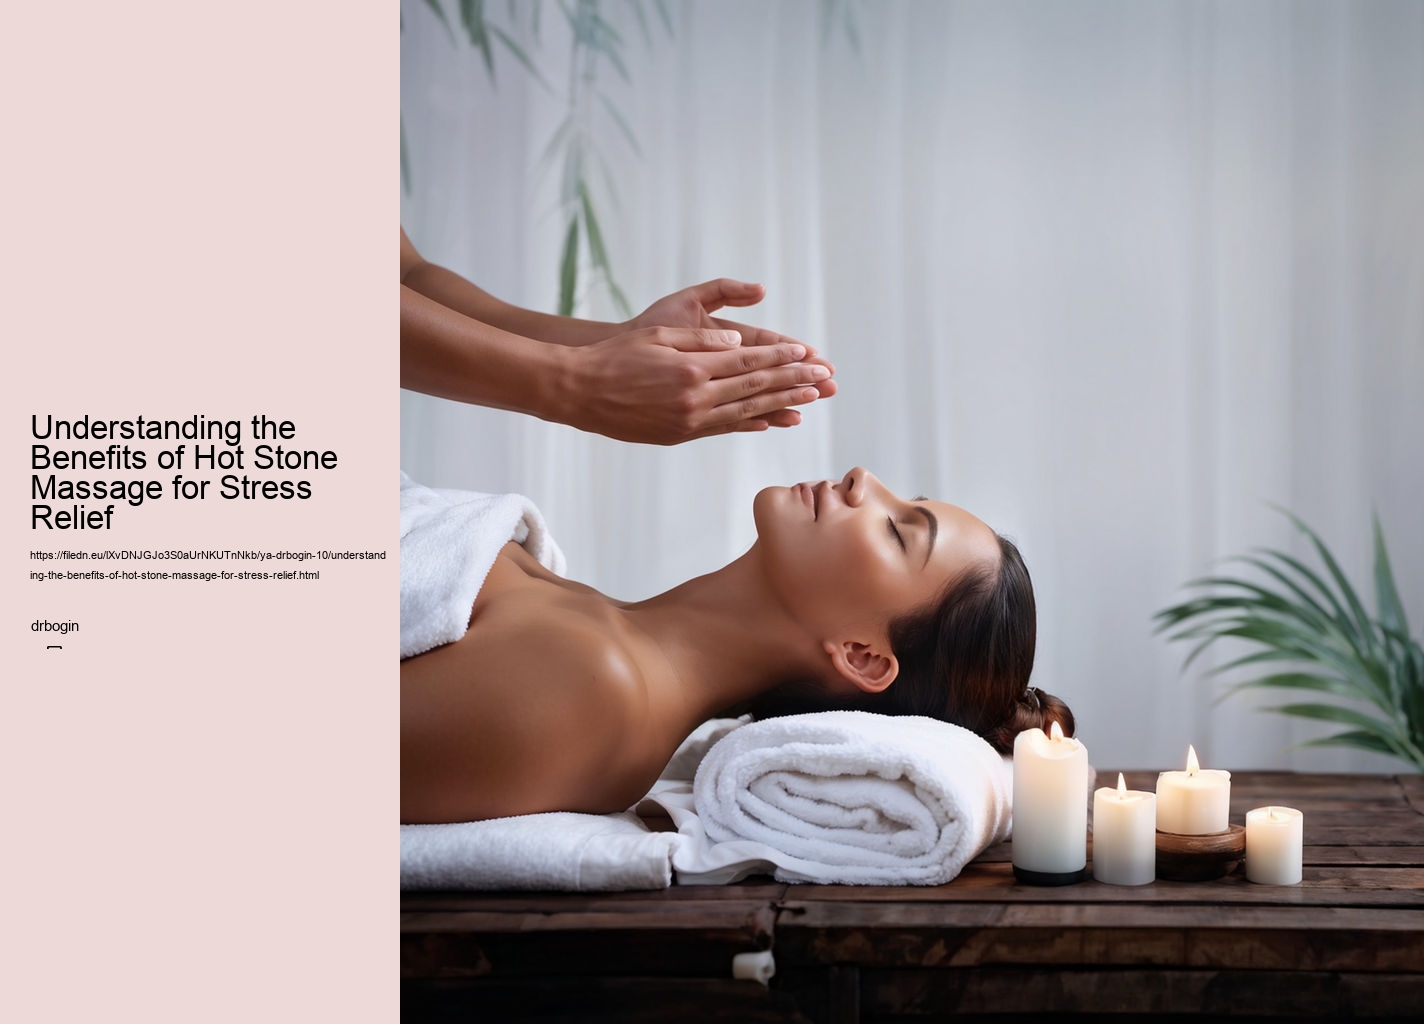 Understanding the Benefits of Hot Stone Massage for Stress Relief